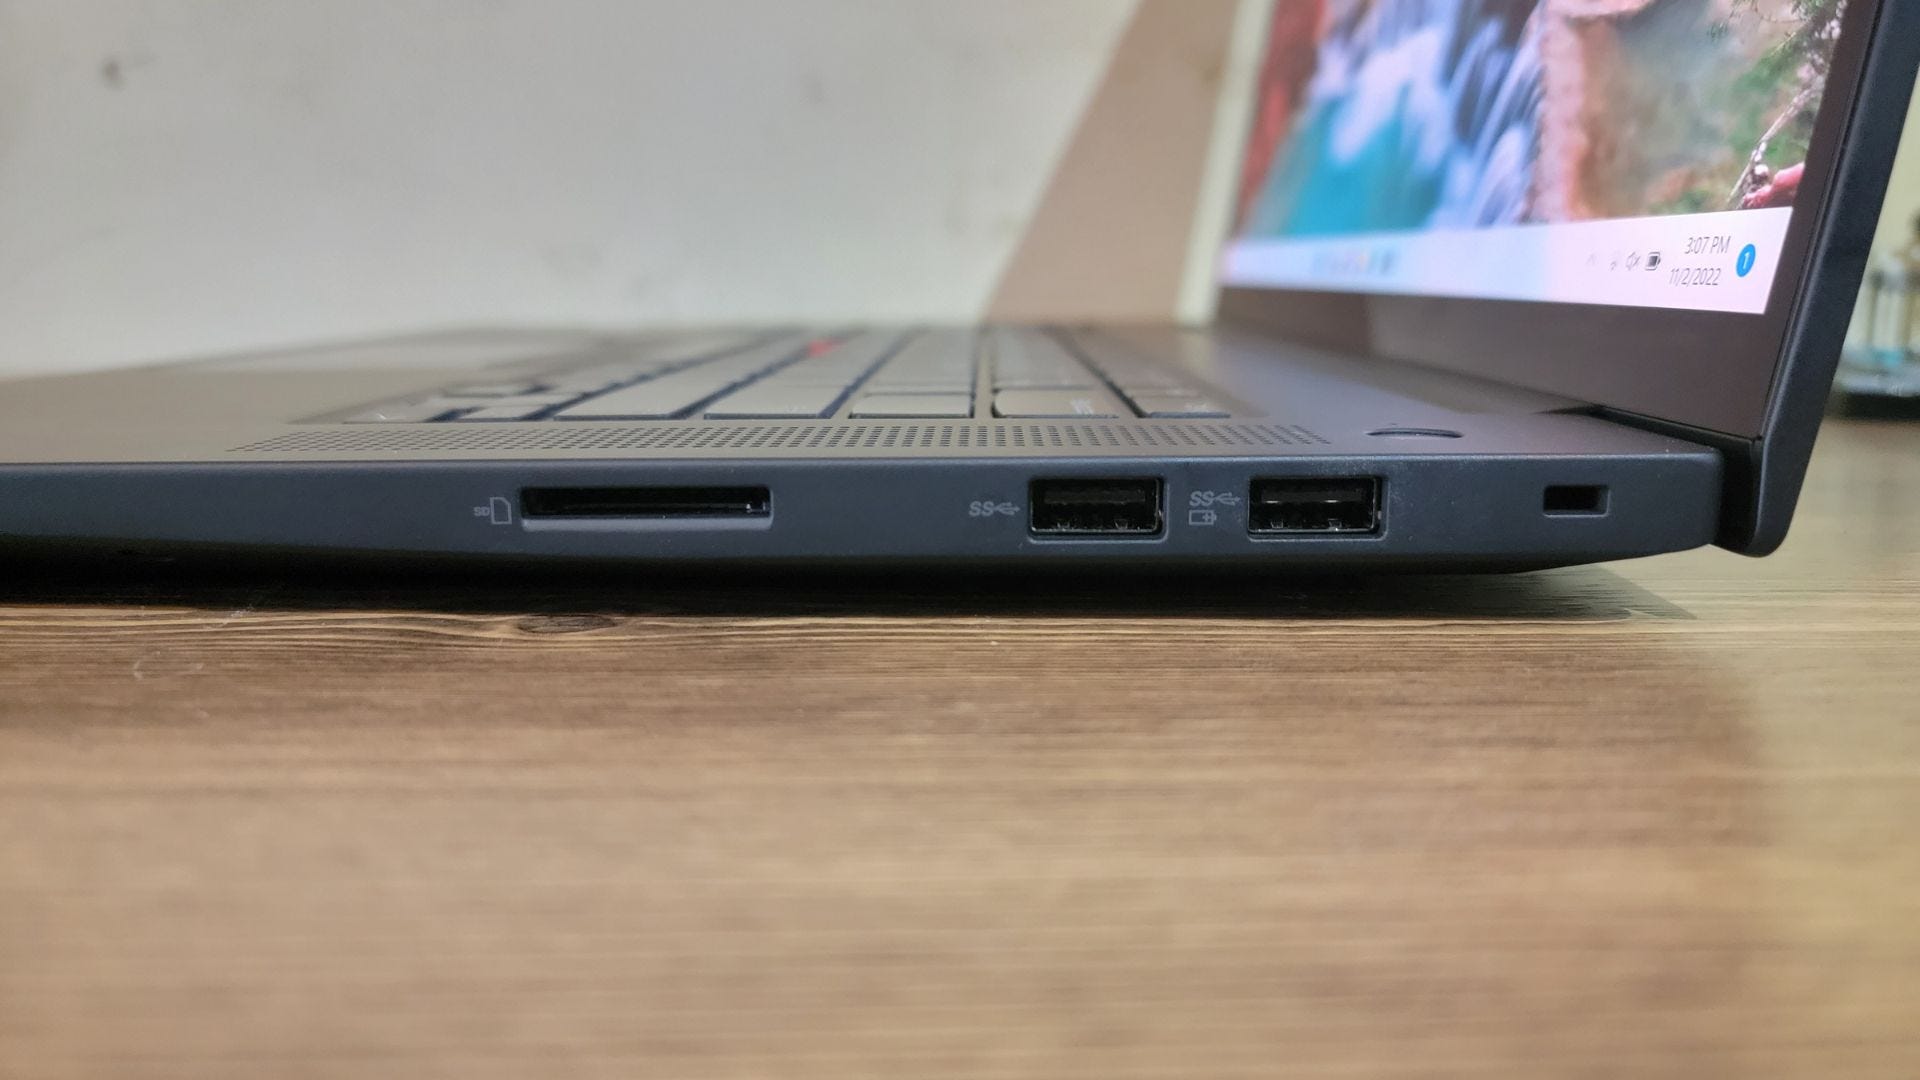 Ports available on the right side of Lenovo ThinkPad X1 Extreme Gen 5